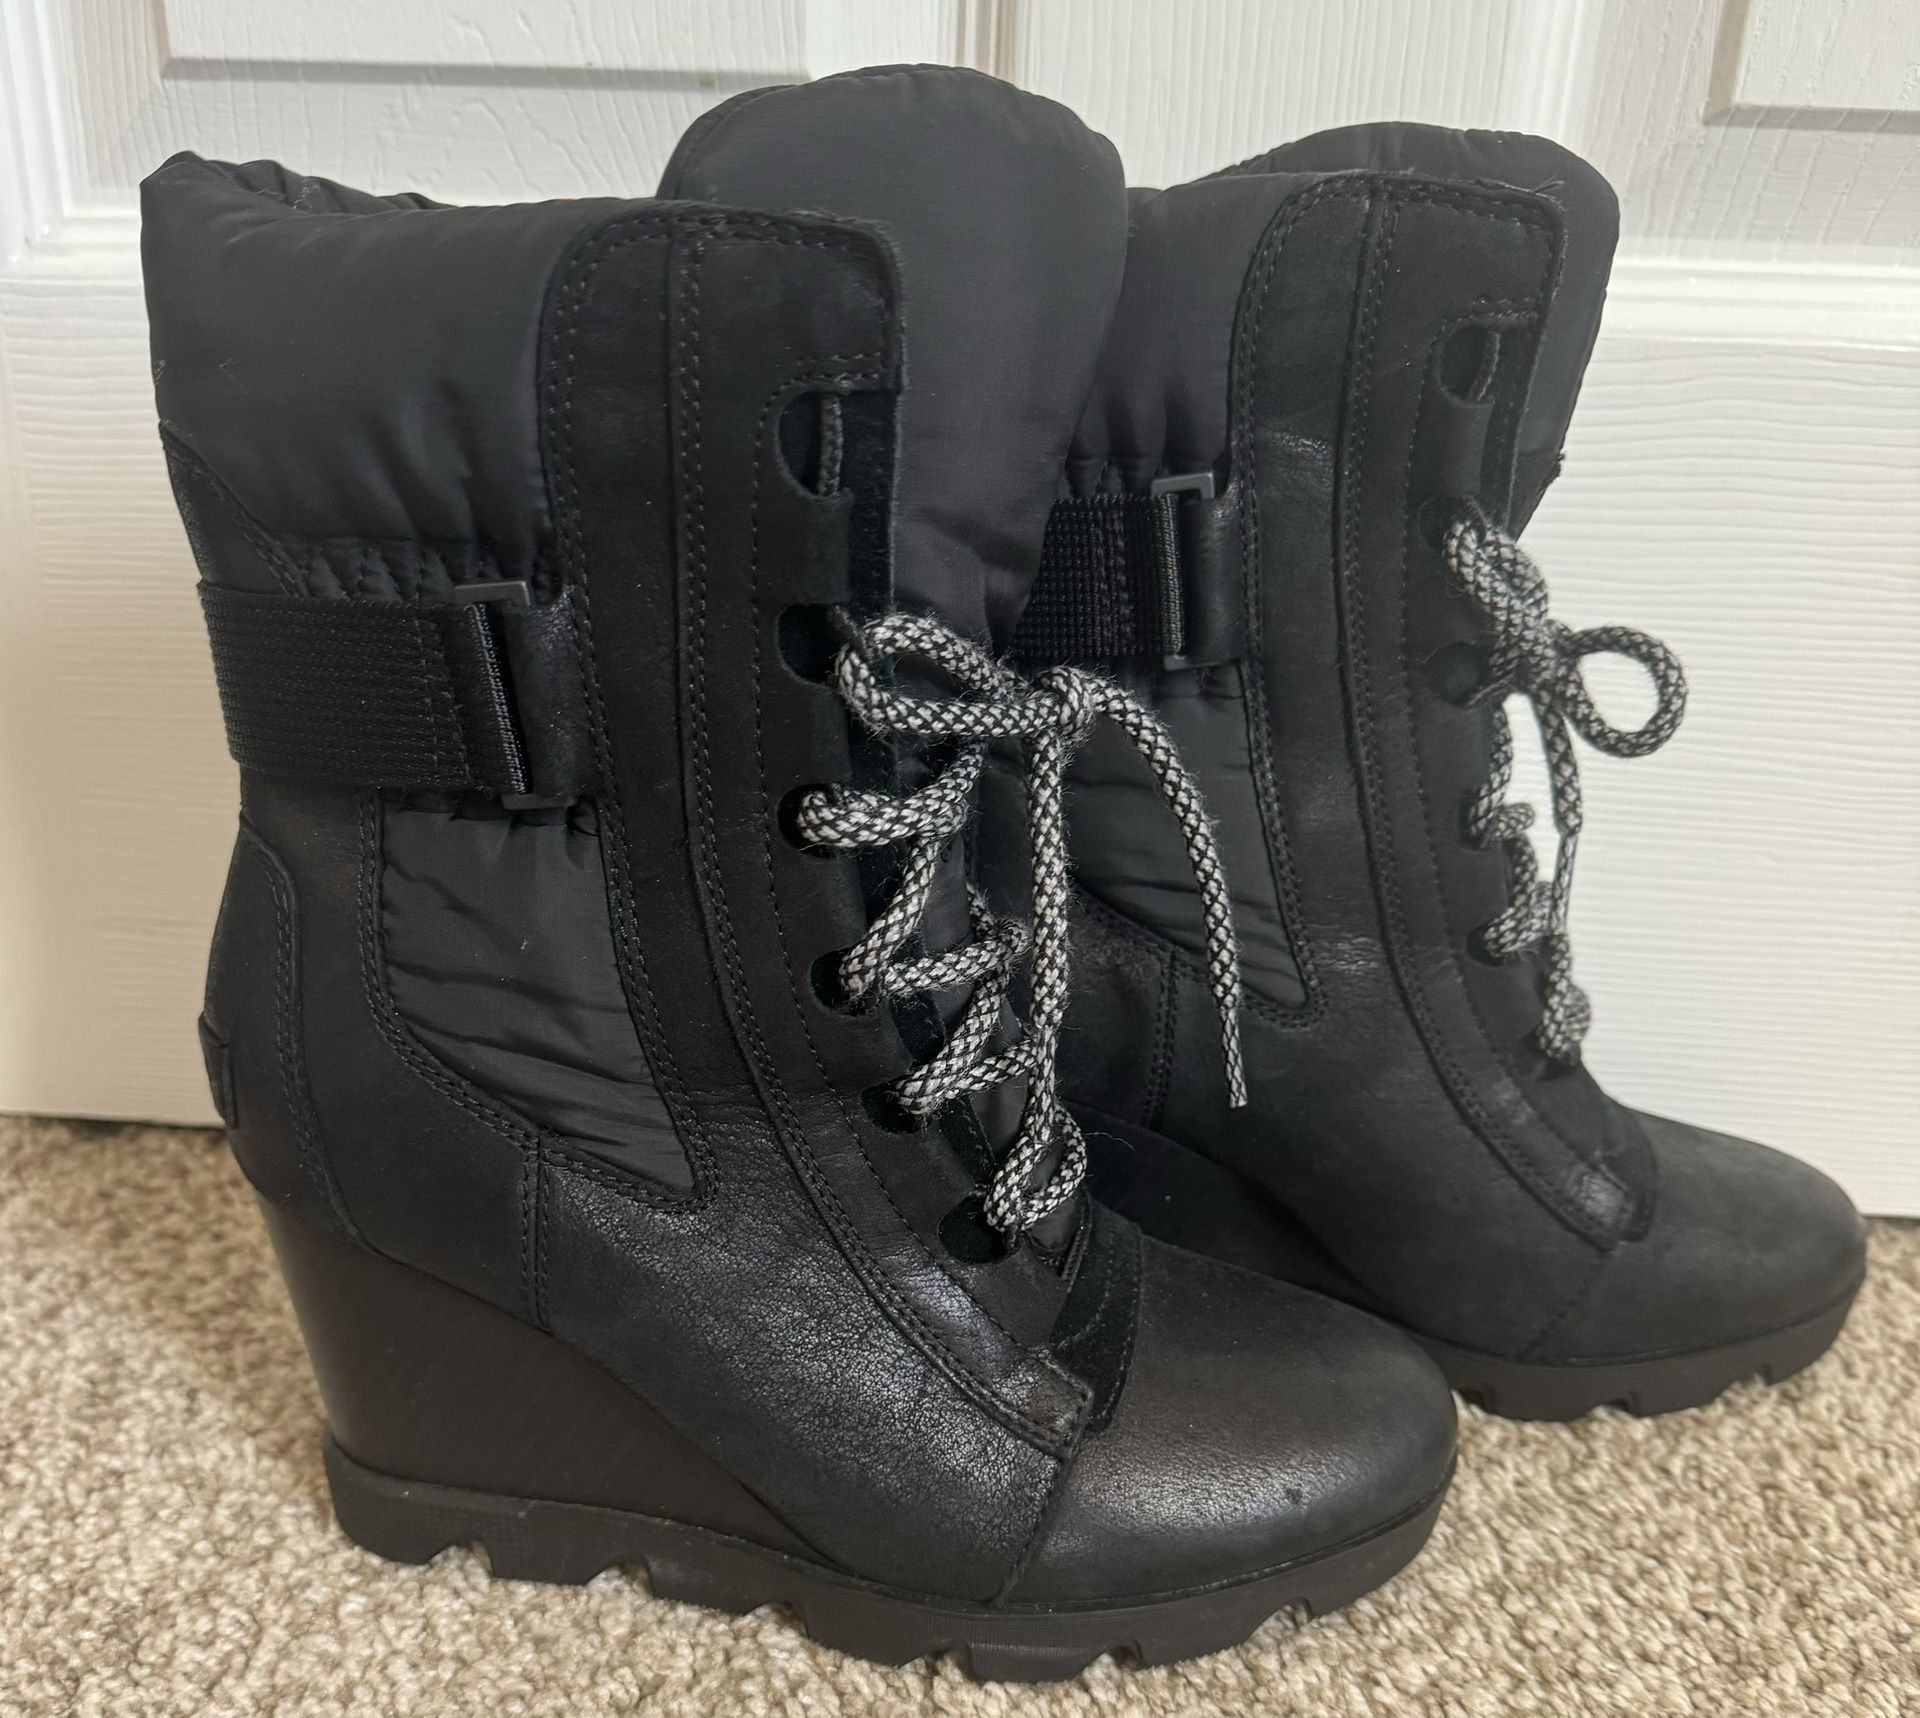 SOREL Black Wedge Boots Women. Used 1 time. Size 7.5